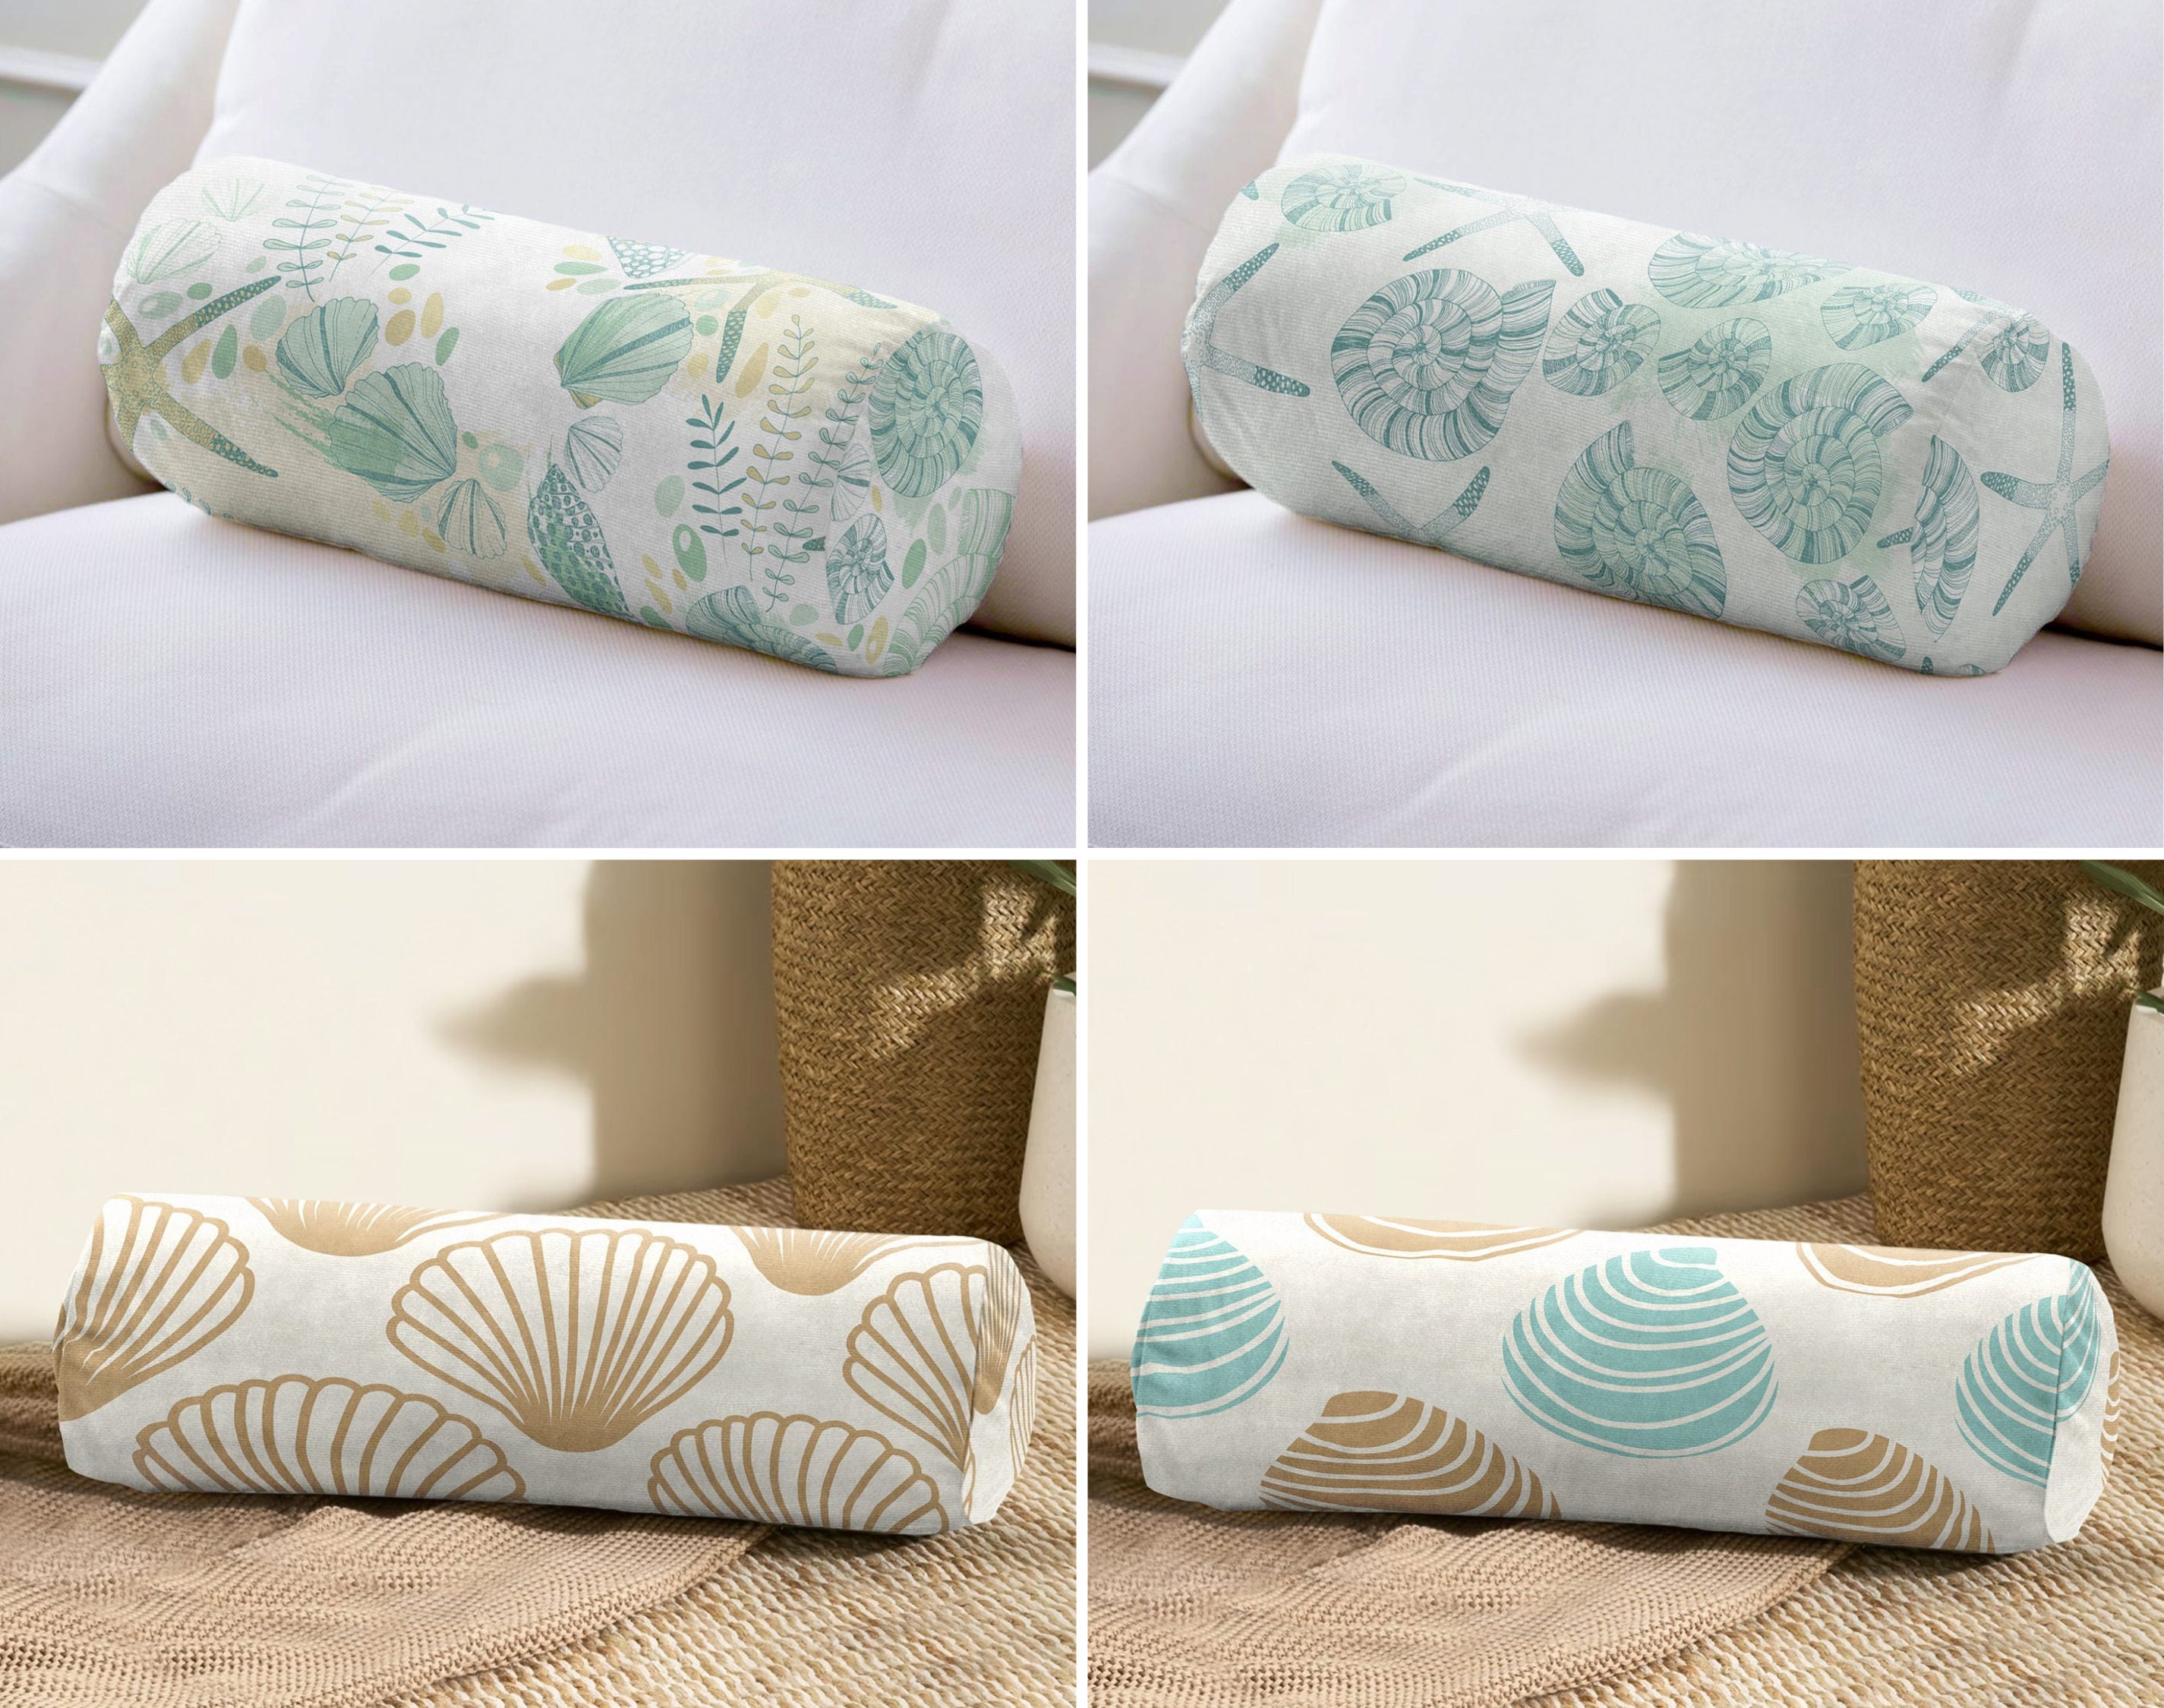 Extra Long Velvet Bolster Pillow With Piping and a Dacron-wrapped